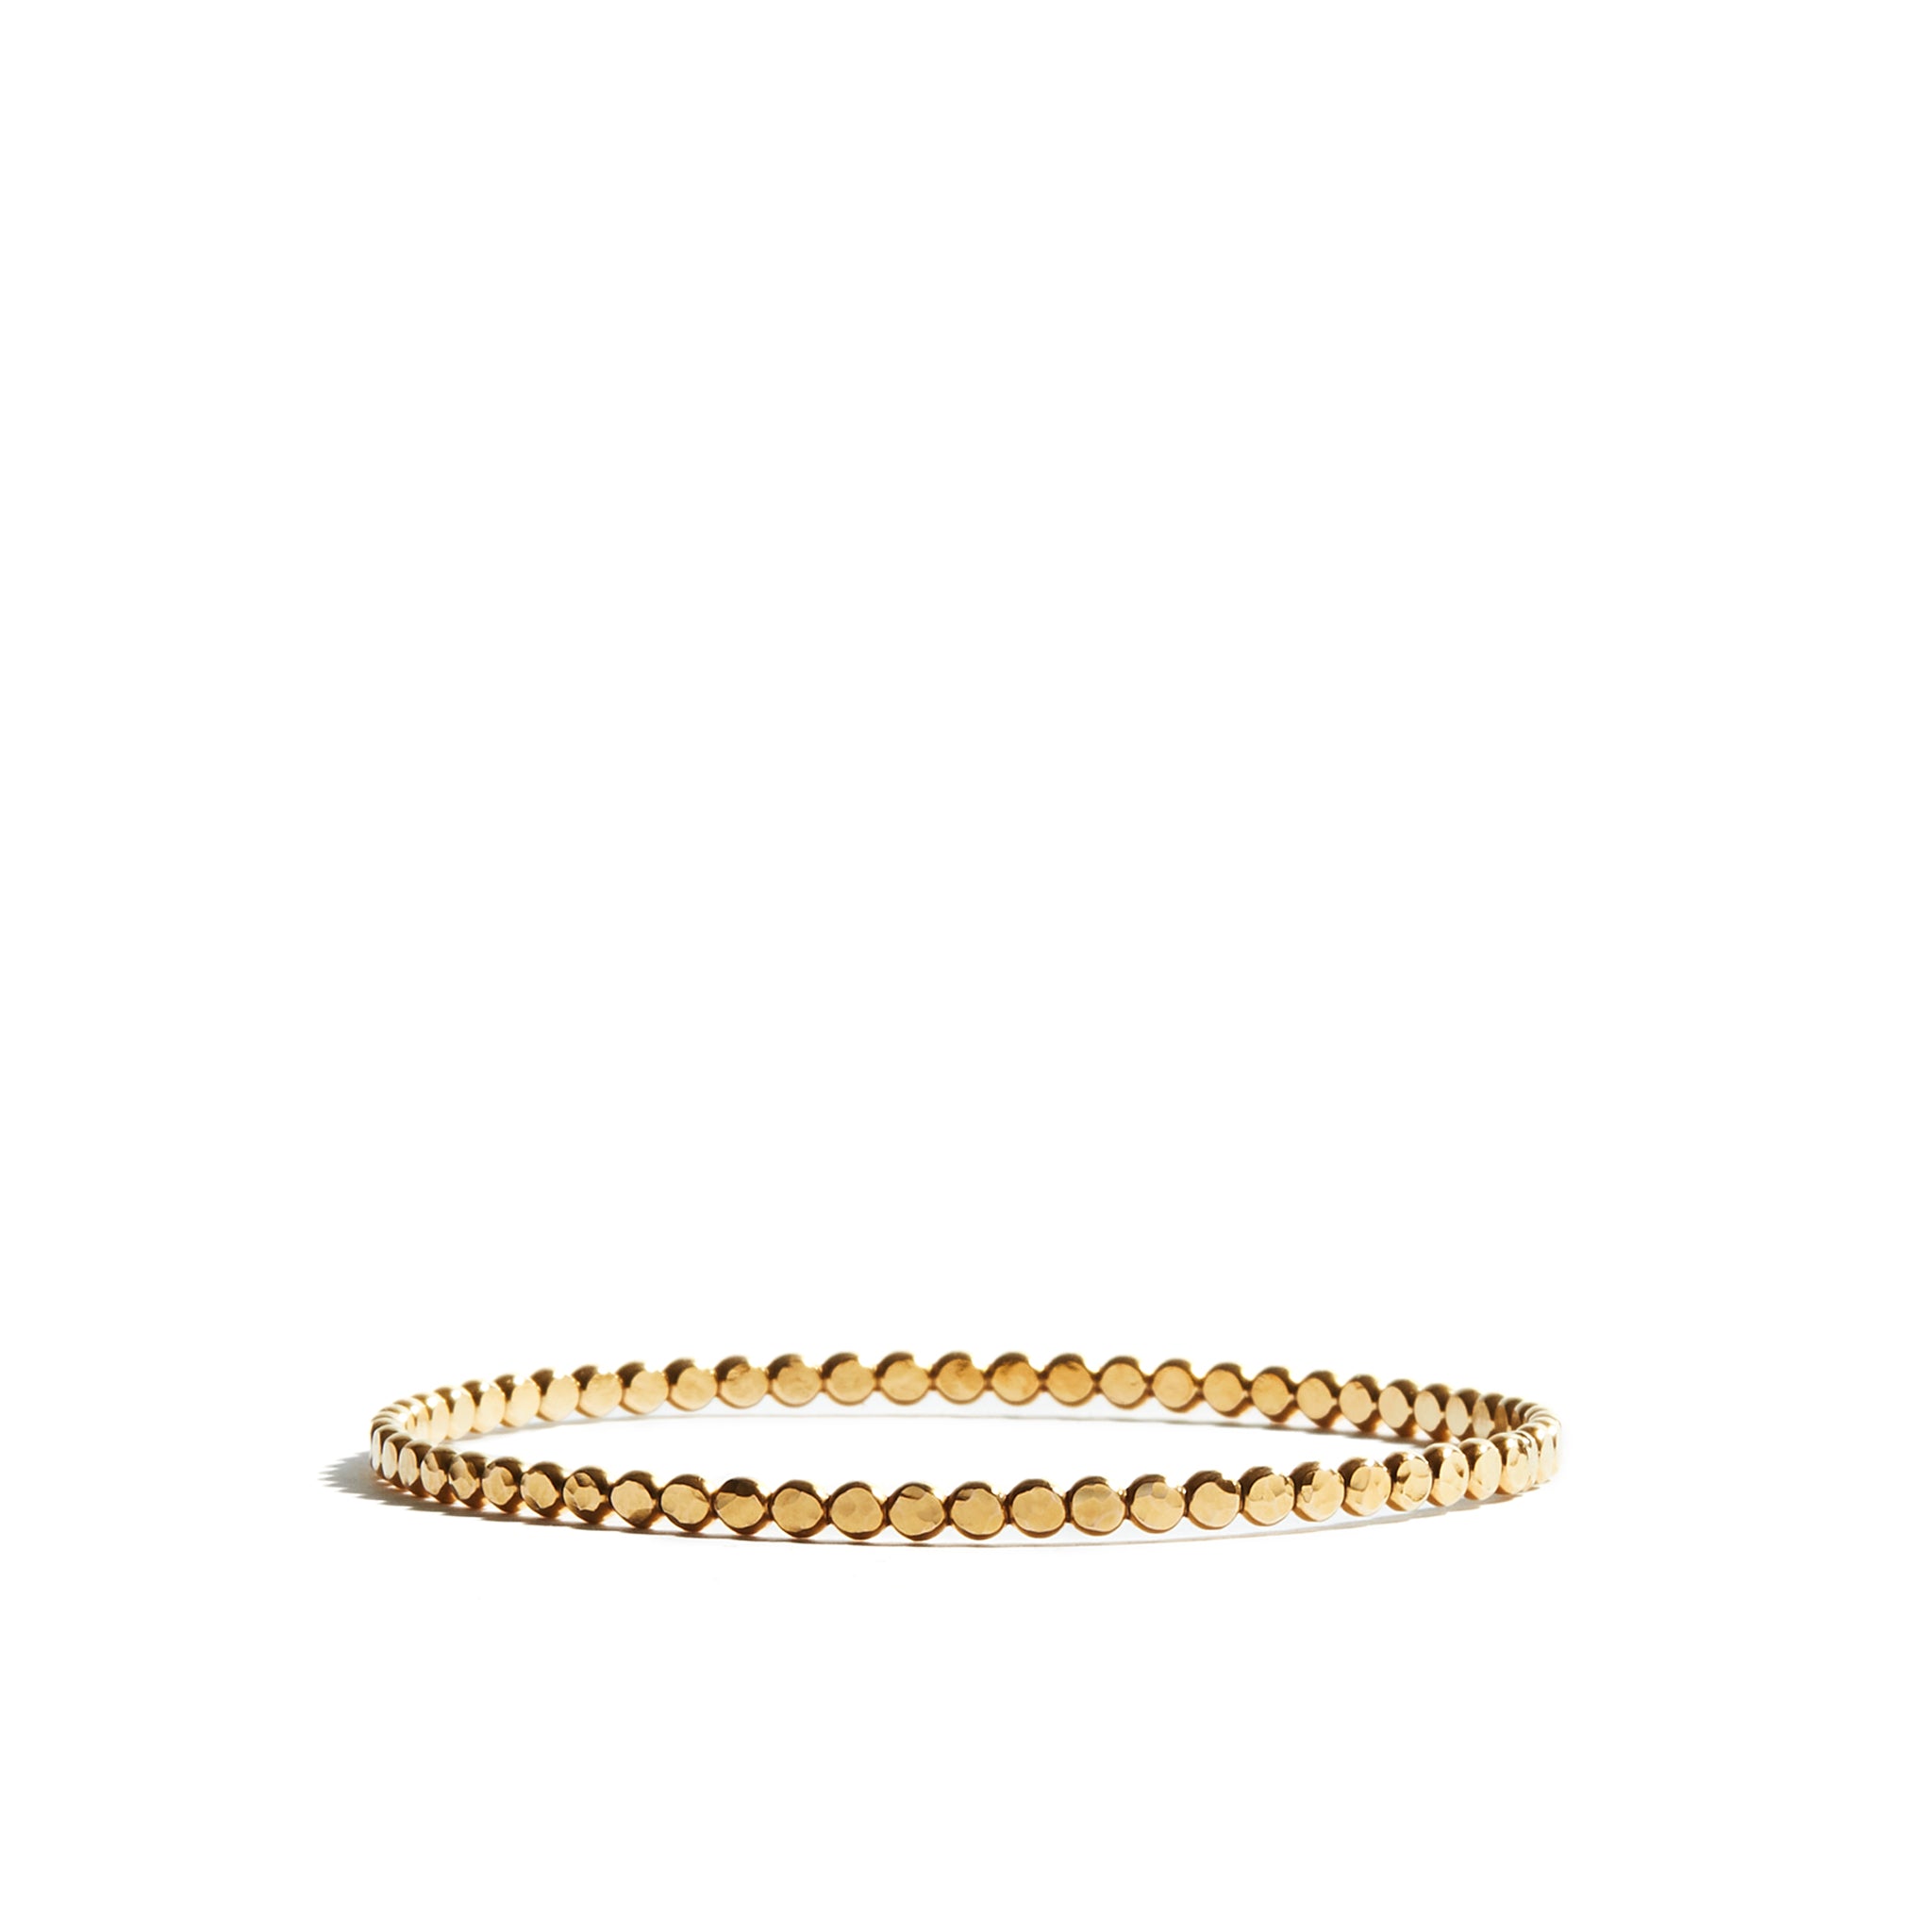 This exquisite bangle is crafted from 14ct gold filled yellow gold for a premium finish. Its square design makes for a timeless and stylish piece of jewellery that adds a touch of sophistication to any look.